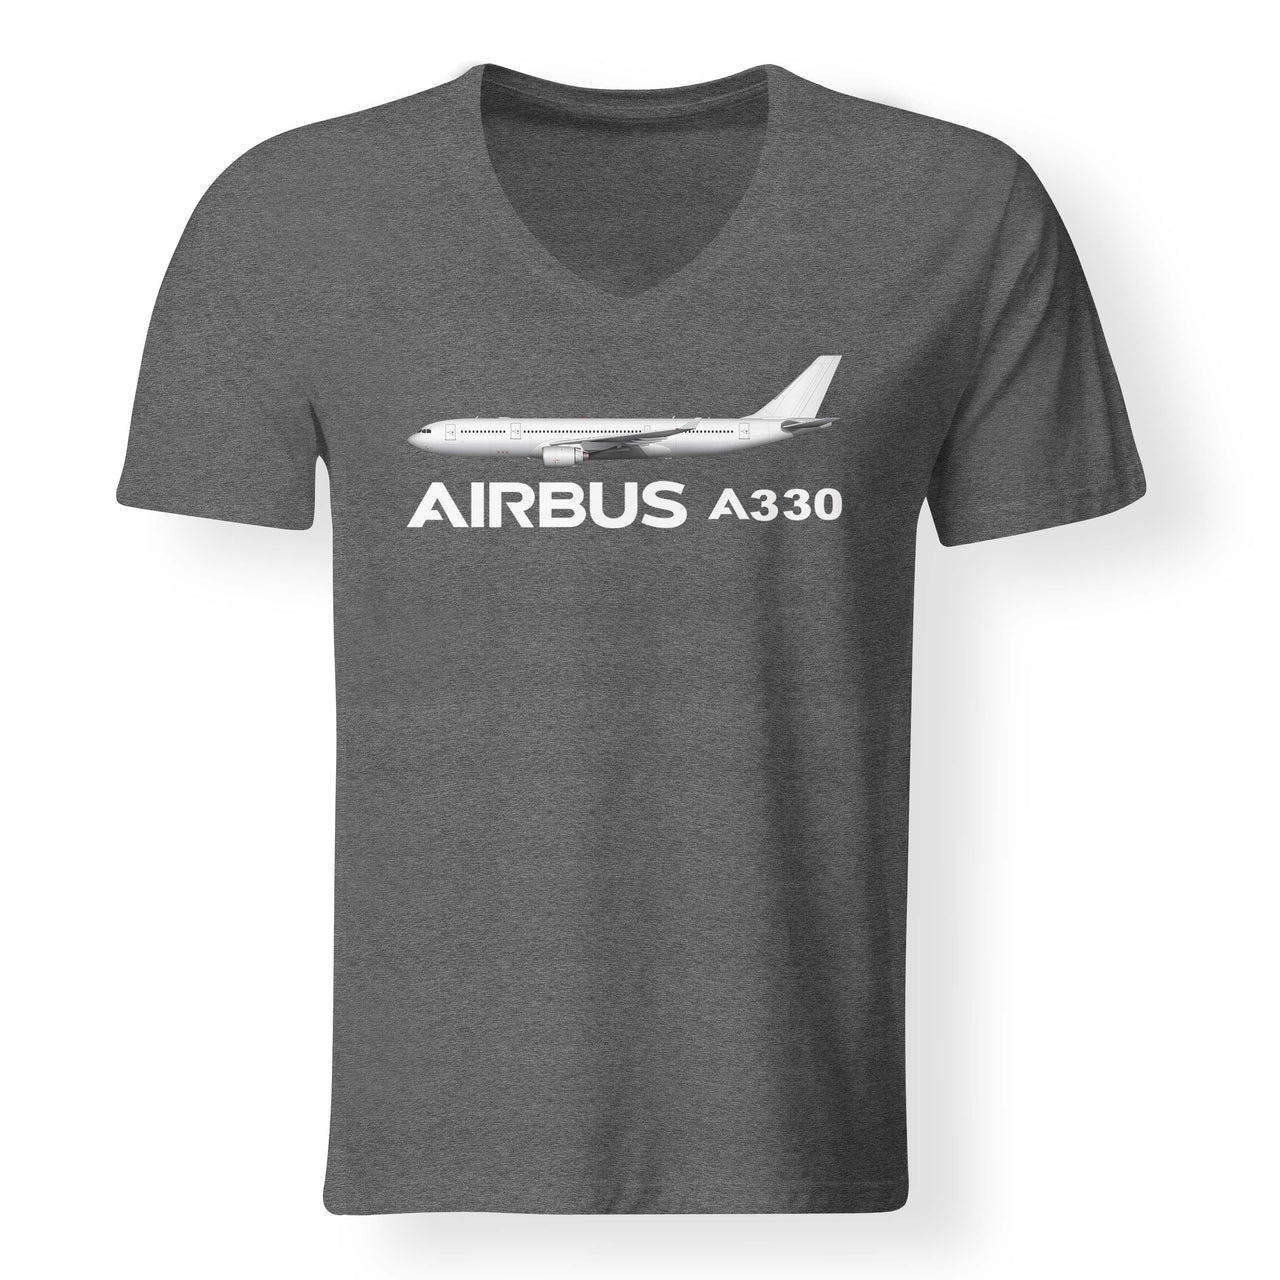 The Airbus A330 Designed V-Neck T-Shirts